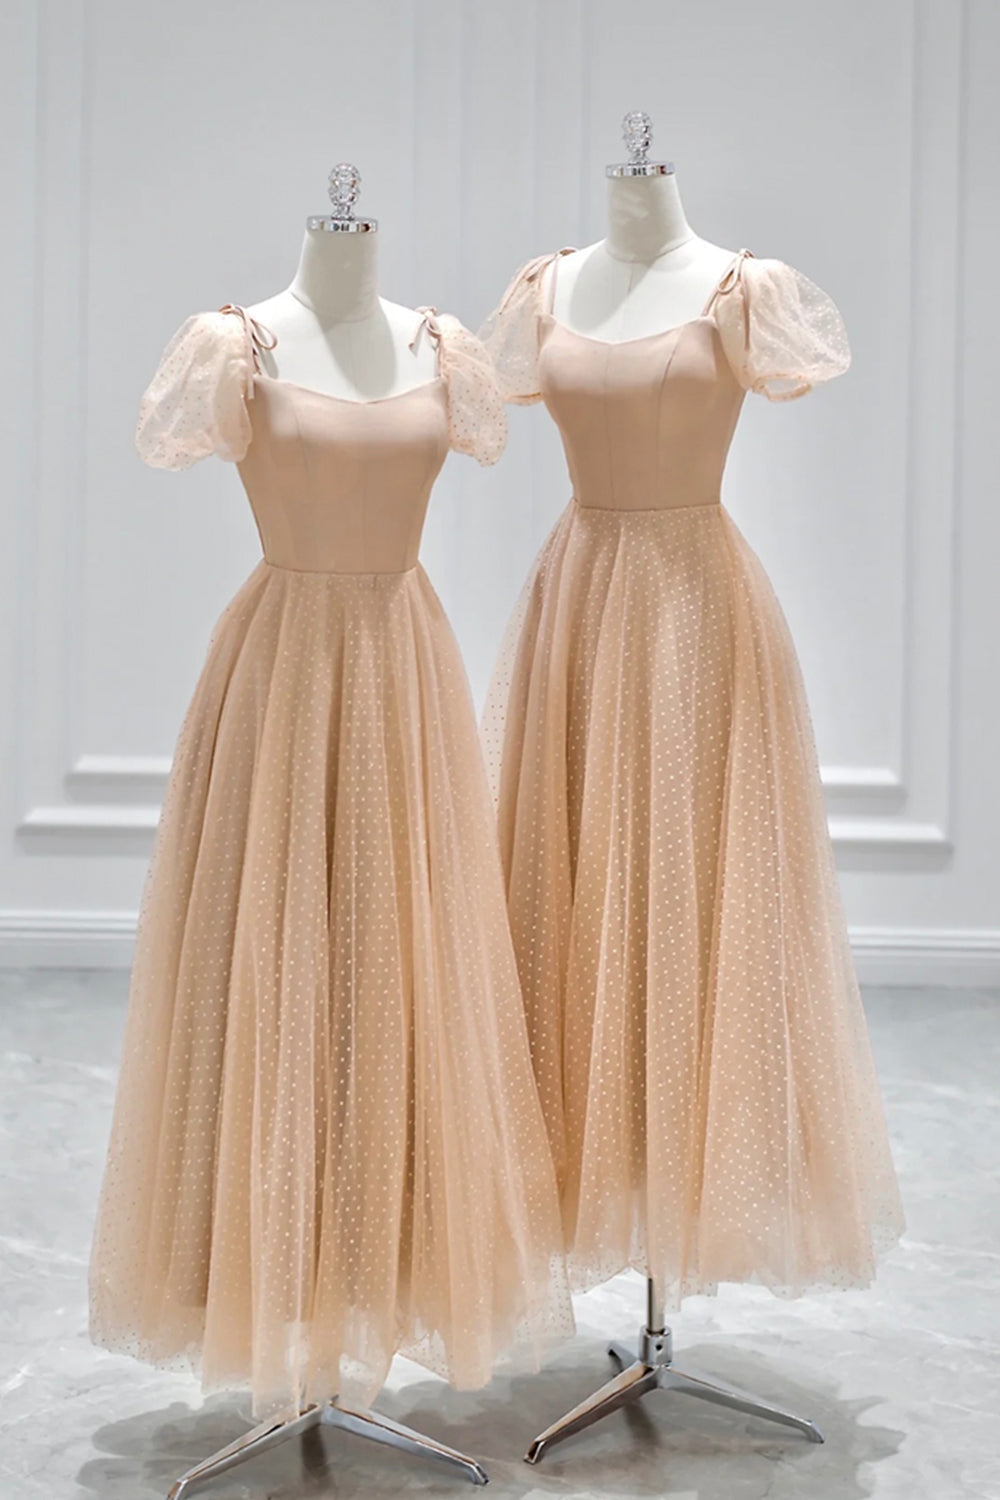 Party Dresses Outfits, Champagne Tulle Tea Length Prom Dress, Cute Short Sleeve Evening Dress